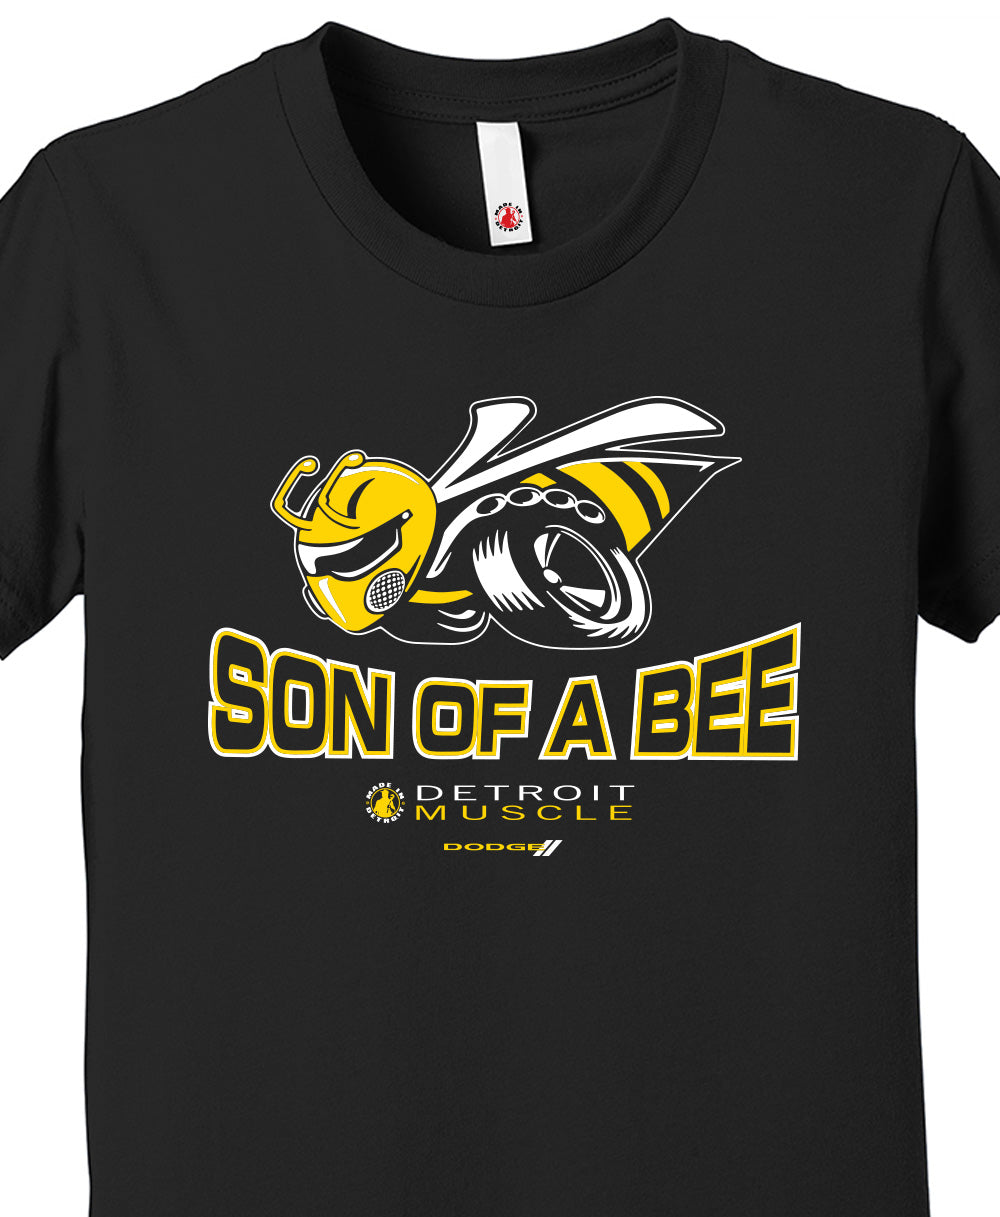 Dodge - Son of a Bee